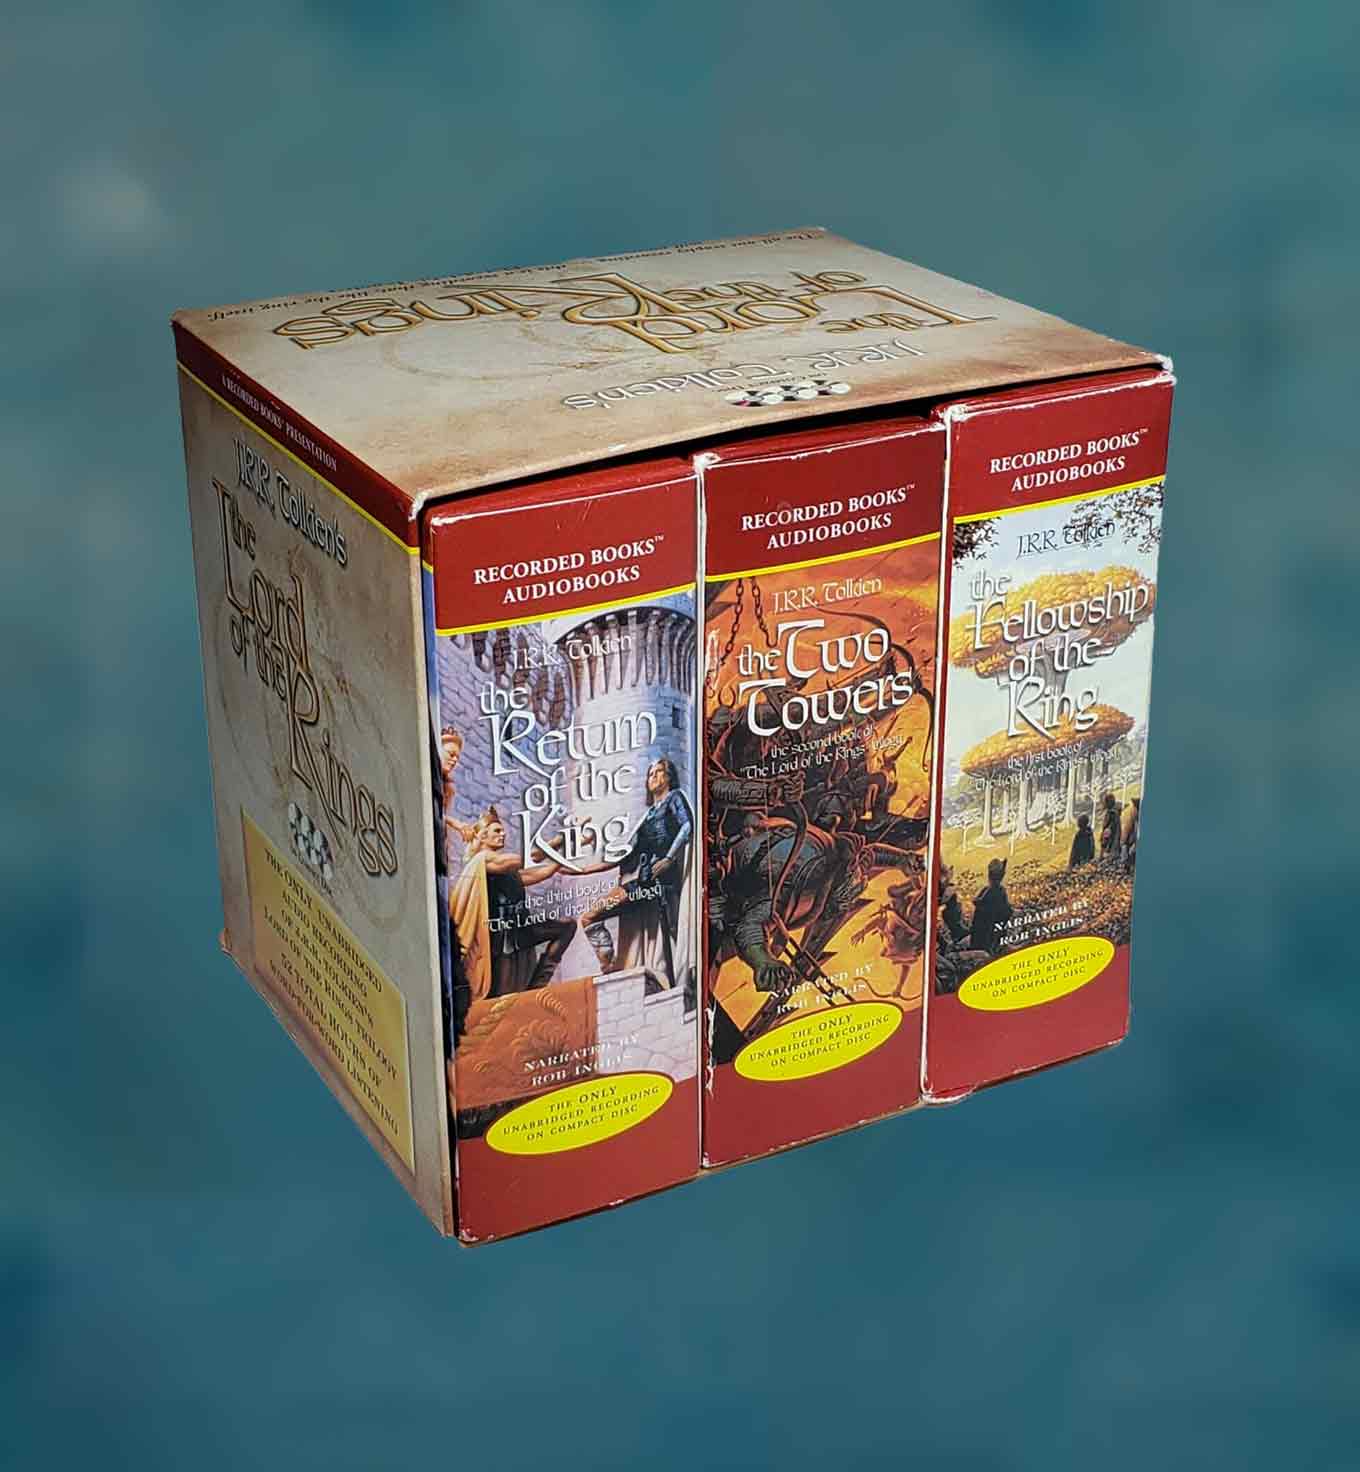 Lord of the Rings audiobook boxed set